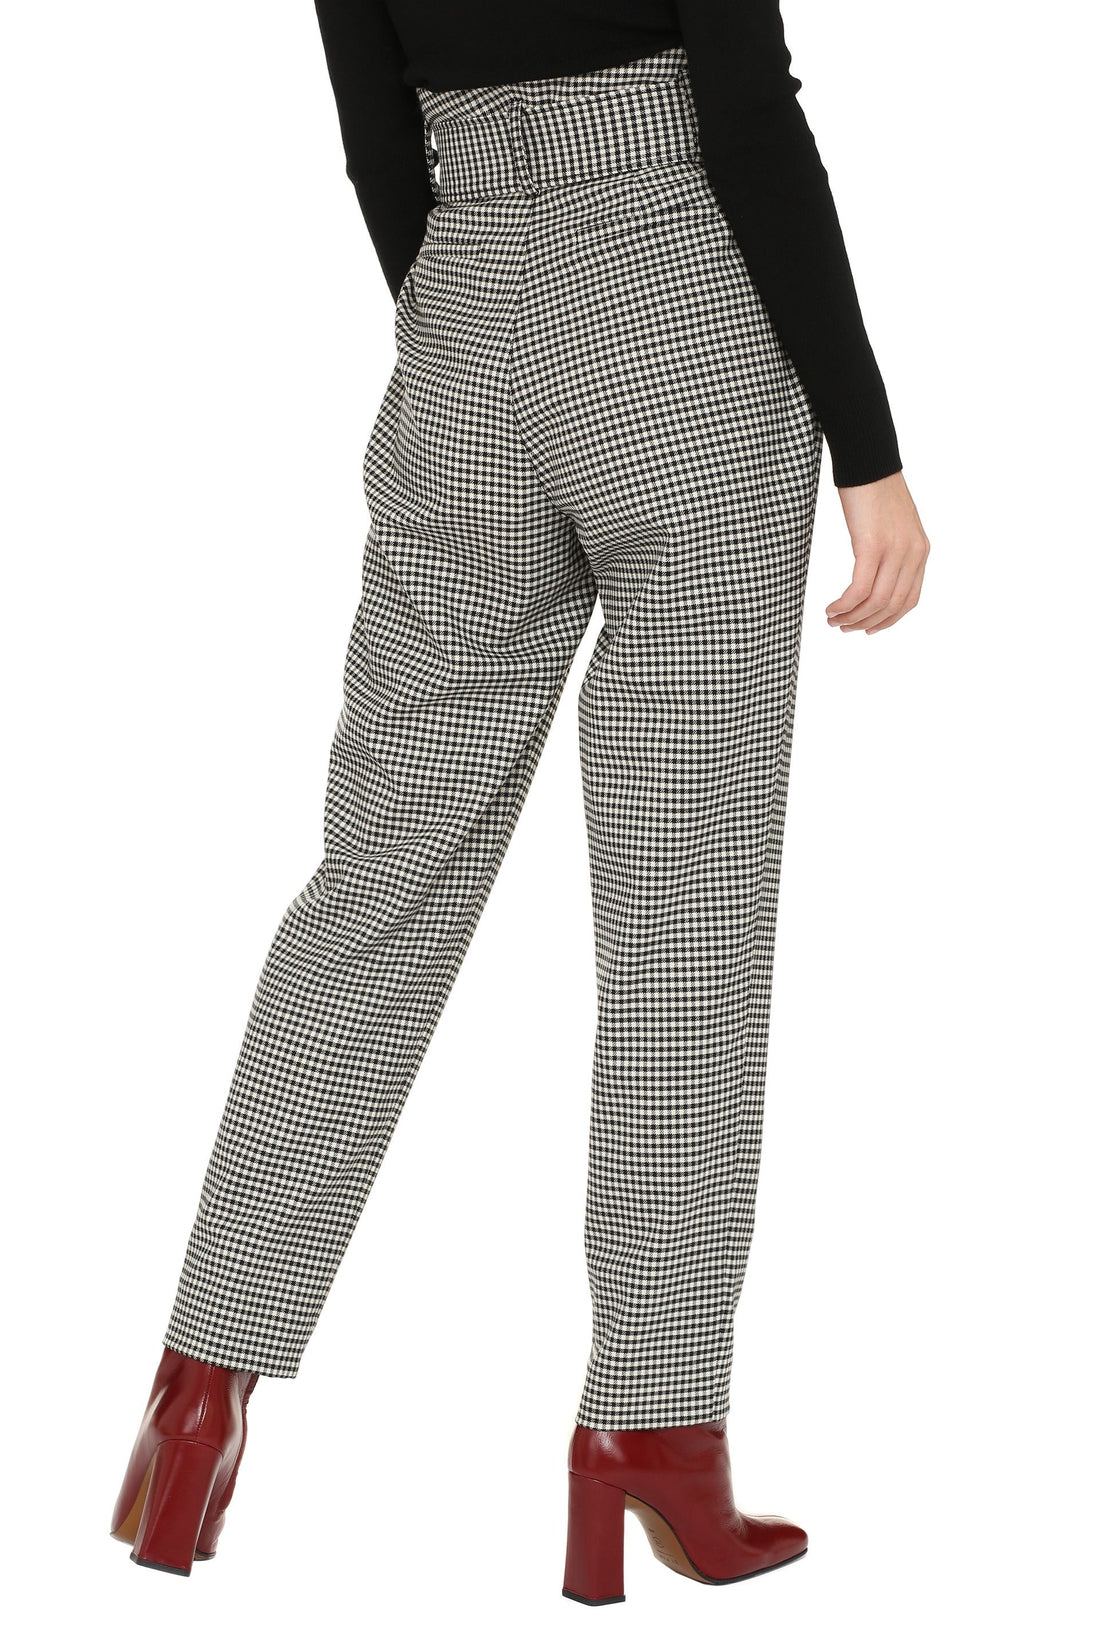 Parosh-OUTLET-SALE-Stretch wool carrot-fit trousers-ARCHIVIST